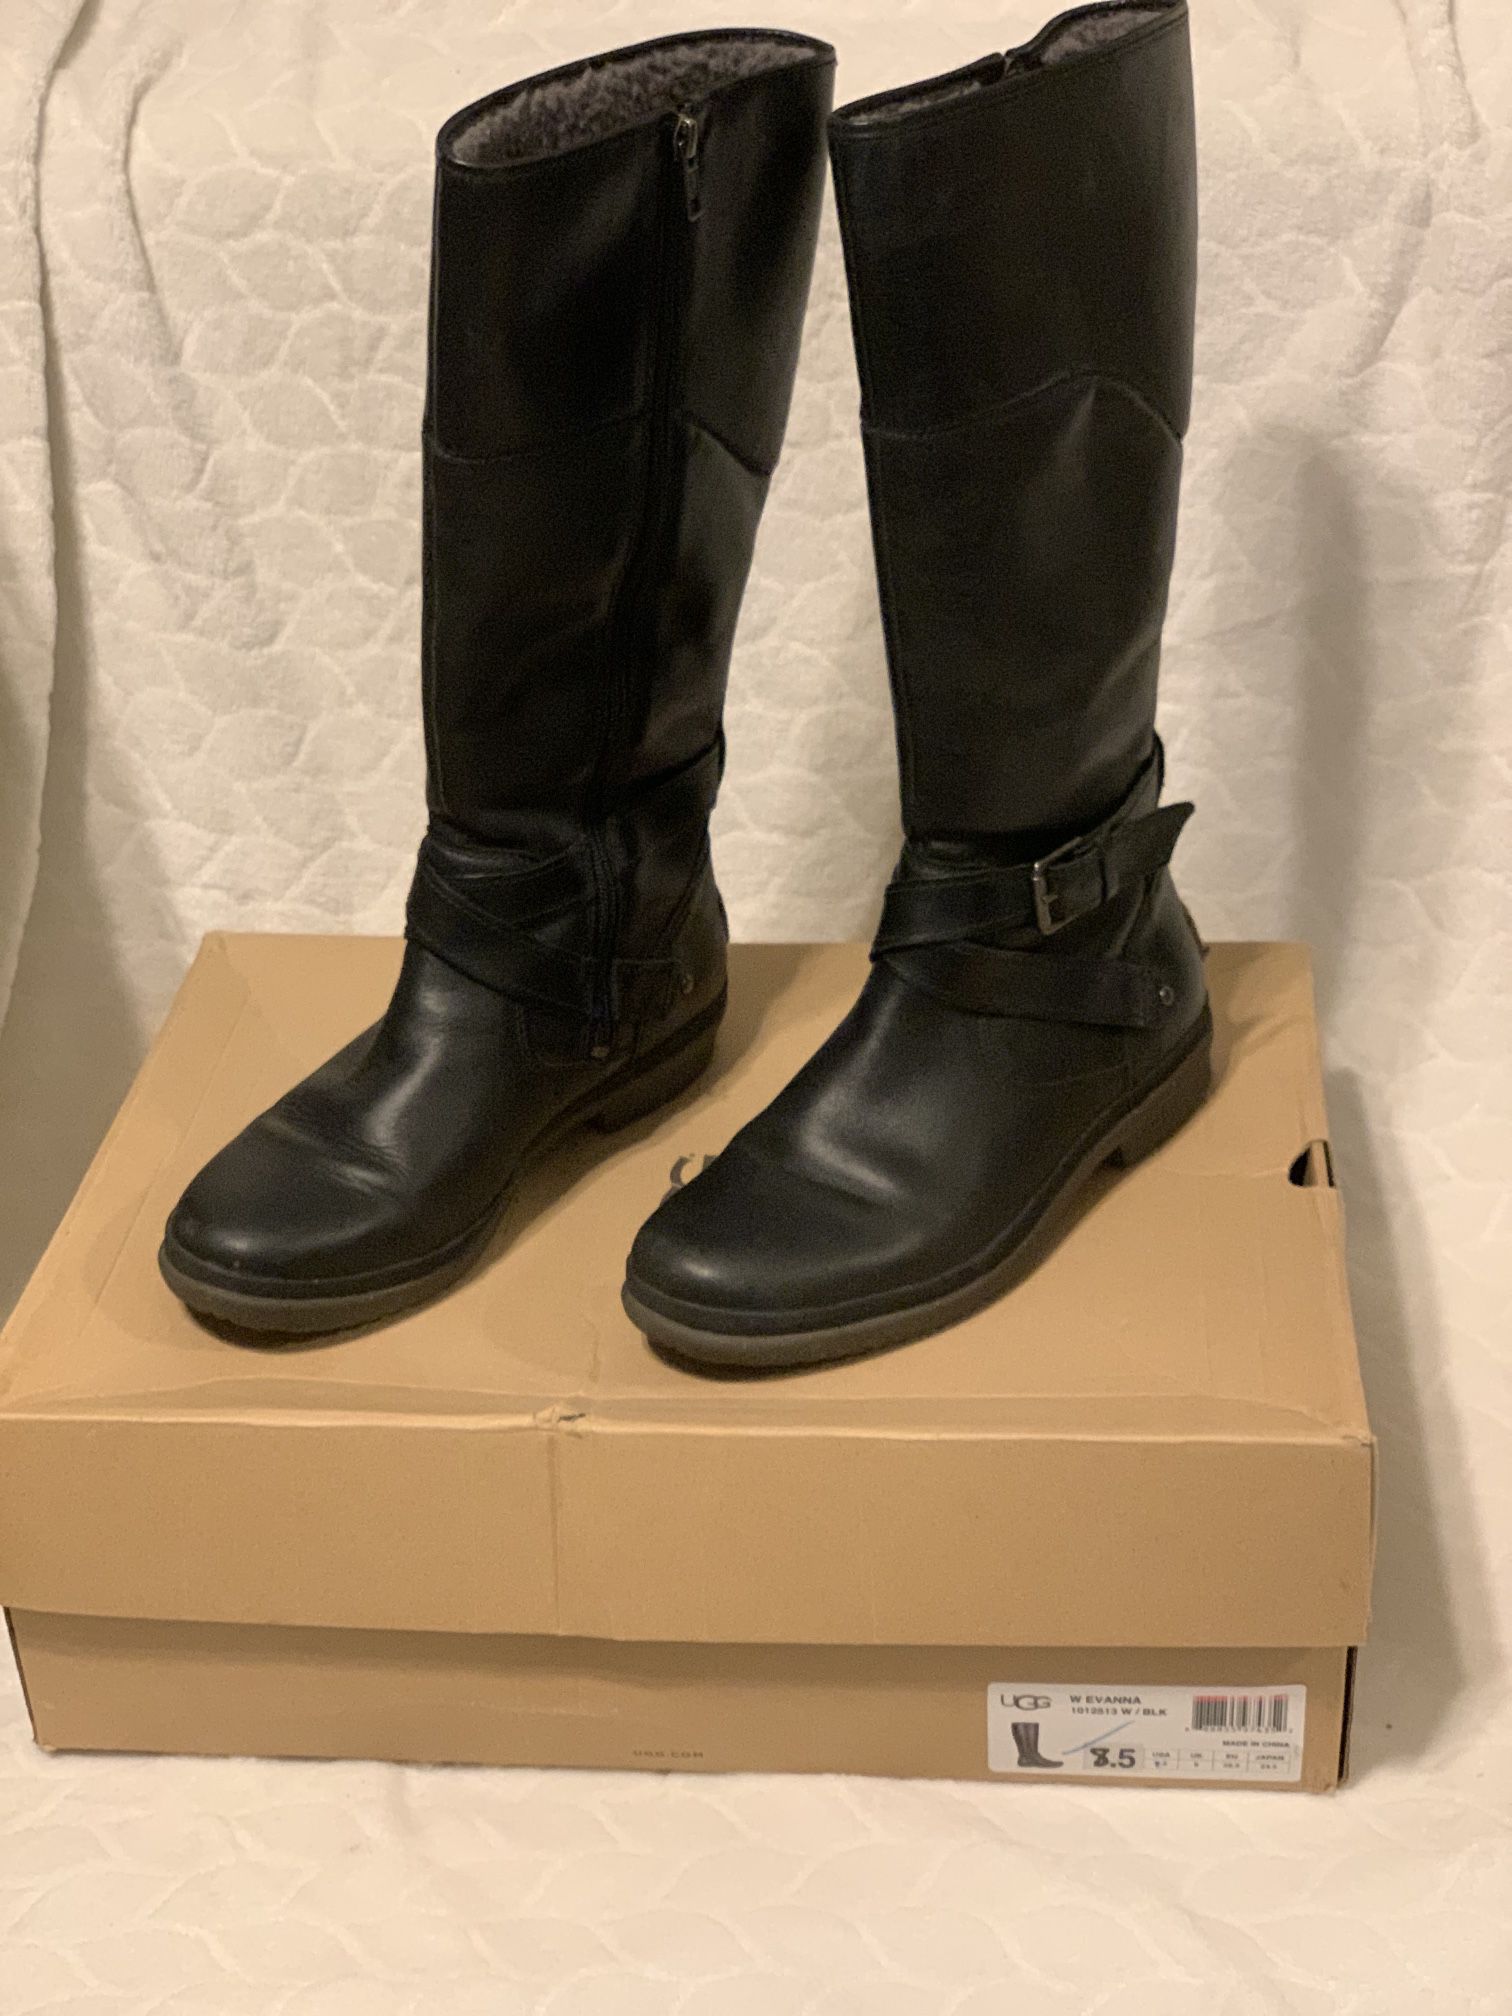 Ugg Boots 8.5 - Leather